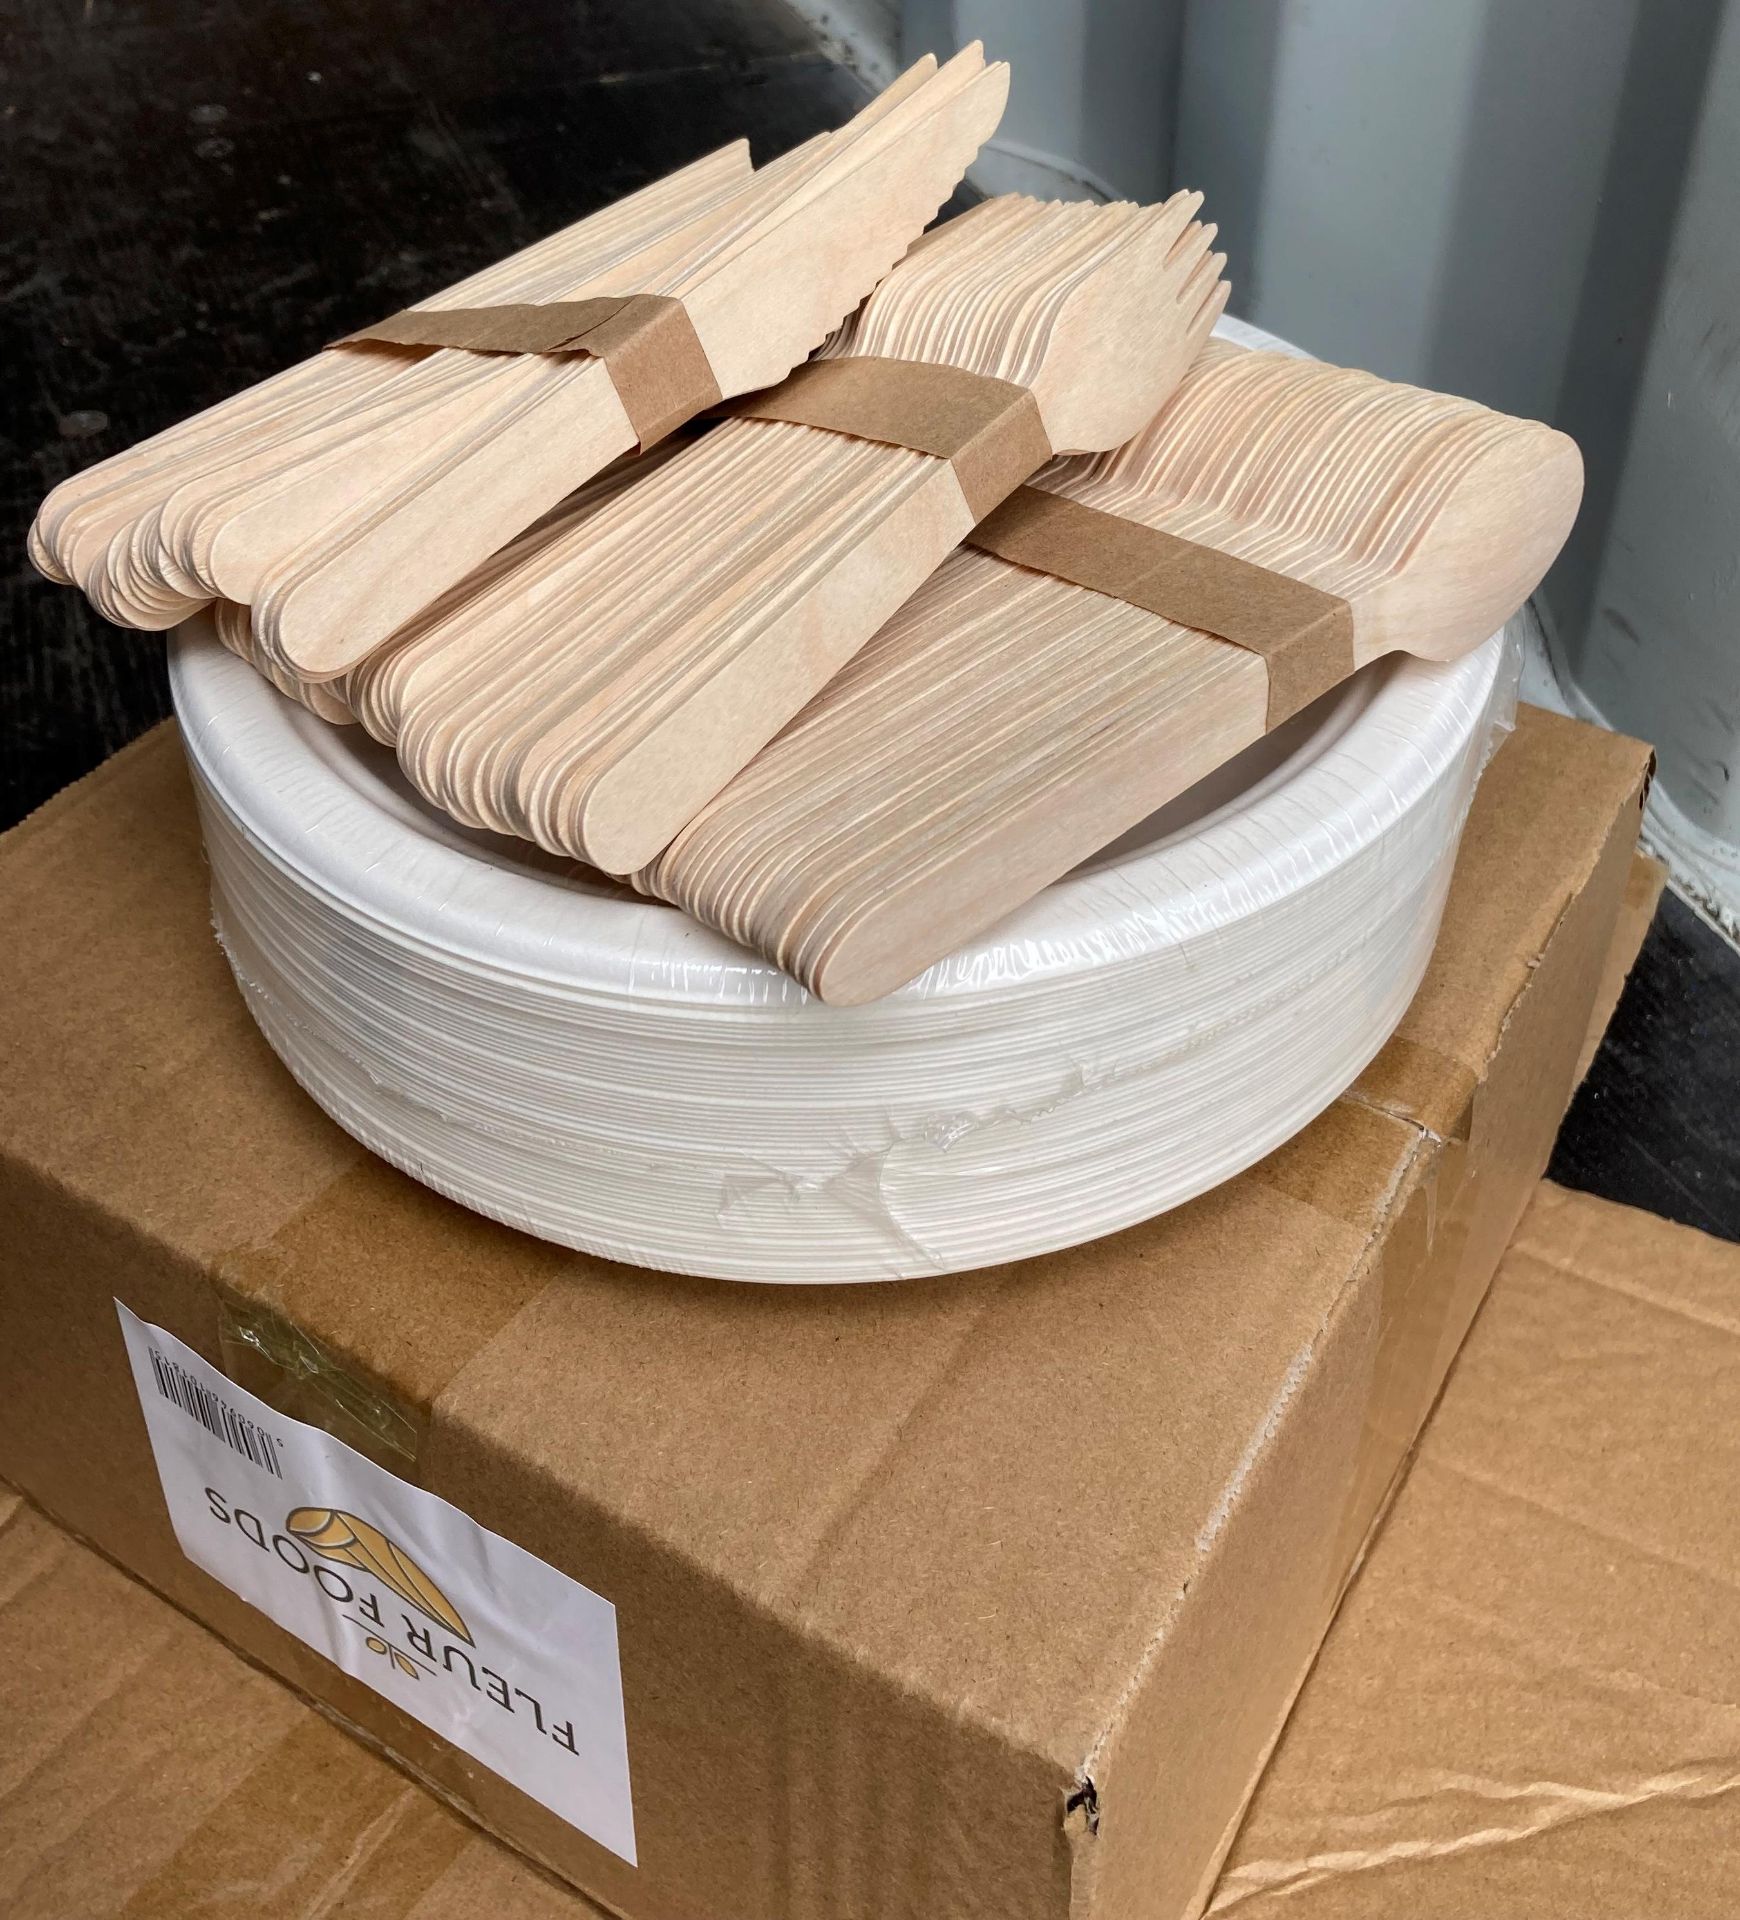 12 x packs and contents of approximately 60 x paper plates, sets of wooden knives, - Image 2 of 5